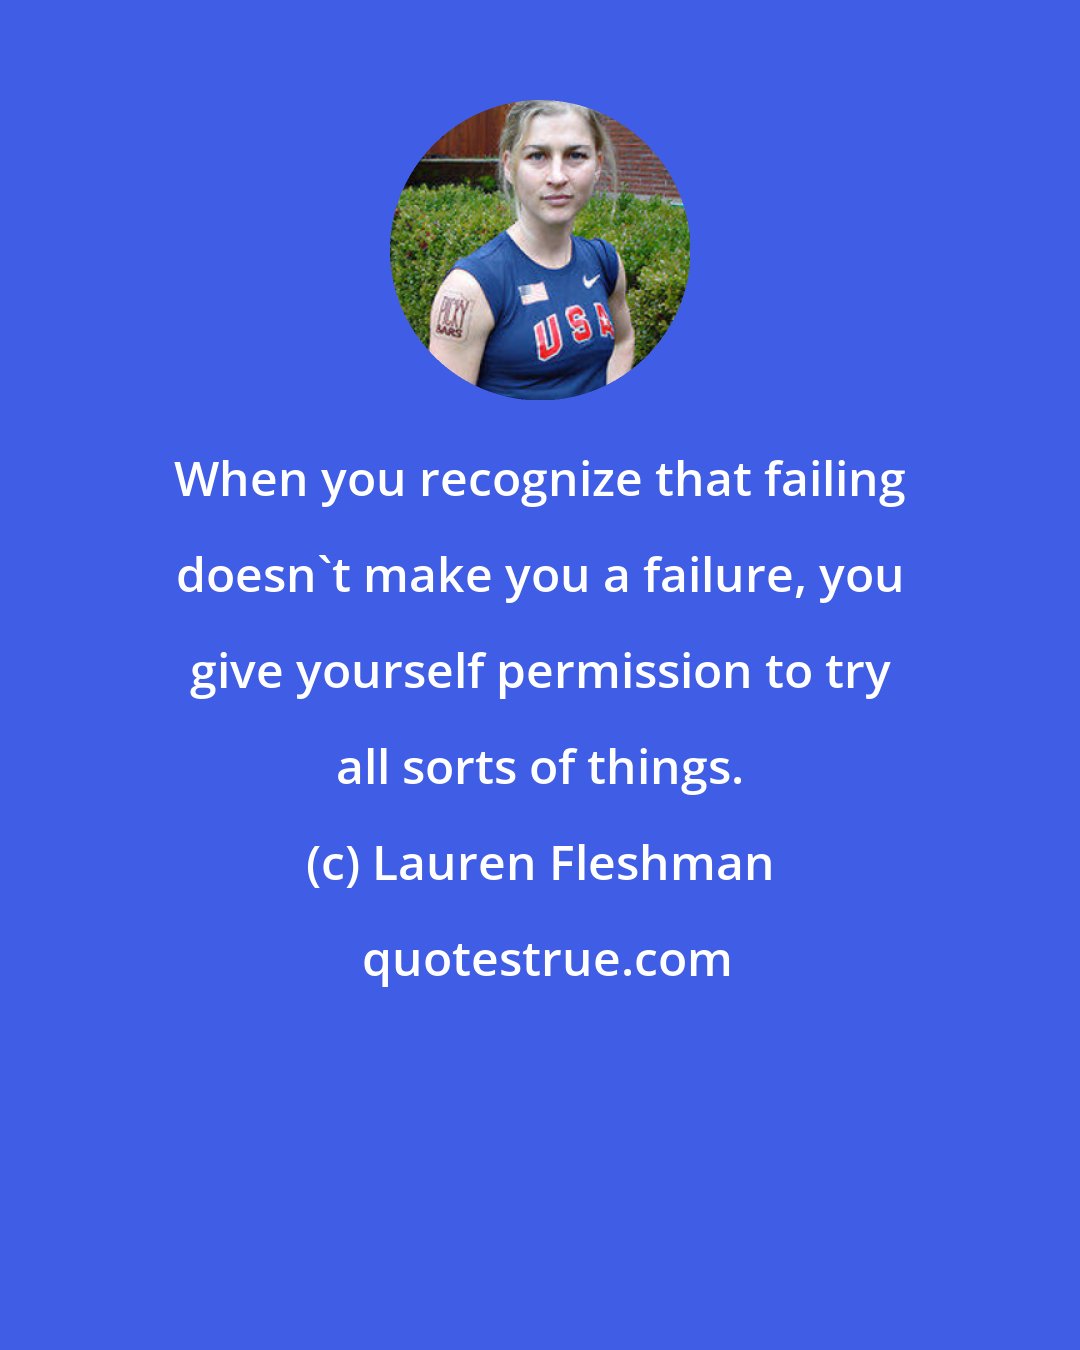 Lauren Fleshman: When you recognize that failing doesn't make you a failure, you give yourself permission to try all sorts of things.